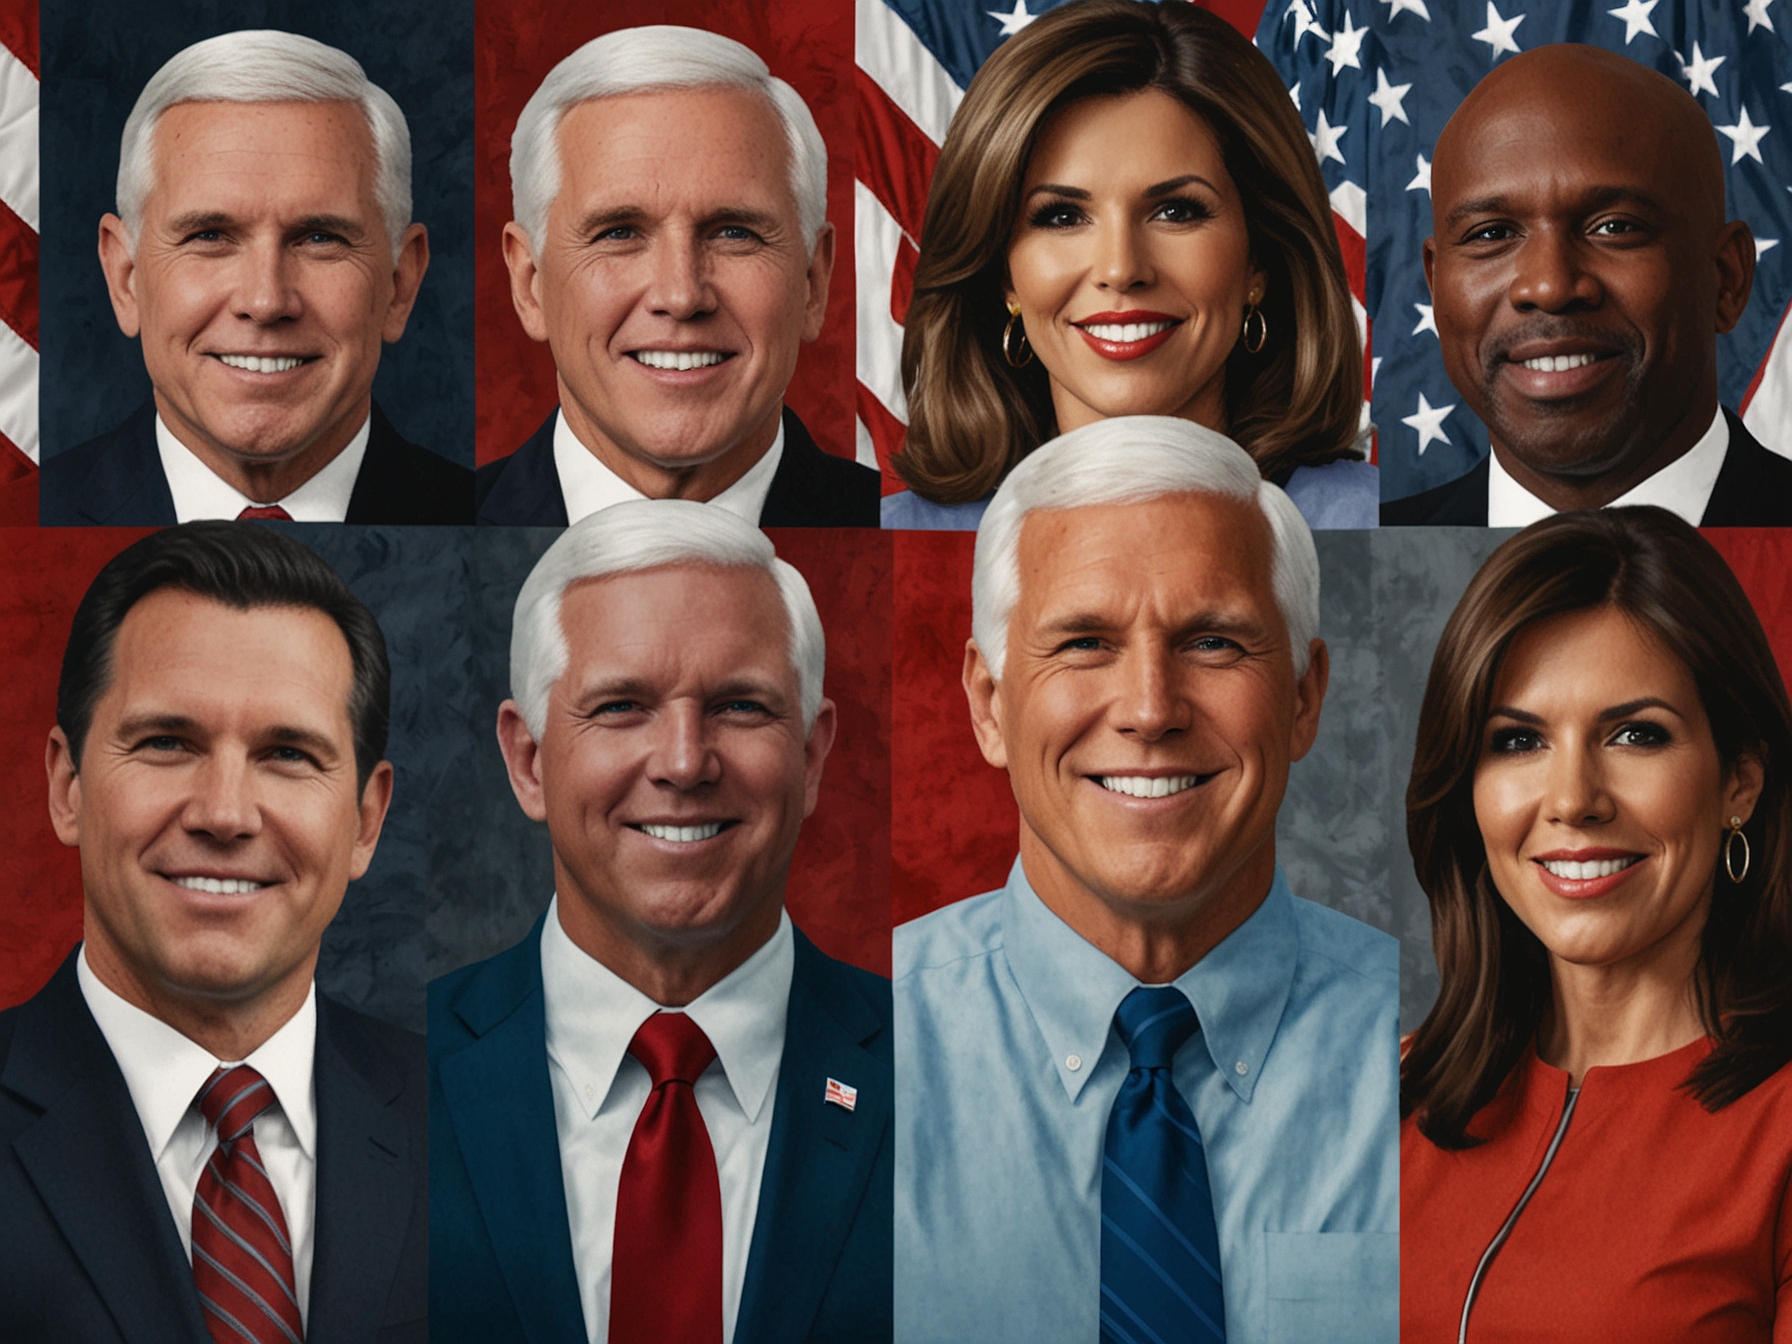 A collage of potential VP candidates including Mike Pence, Ron DeSantis, Kristi Noem, and Tim Scott, each prominently showcasing their distinct public personas and political backgrounds.